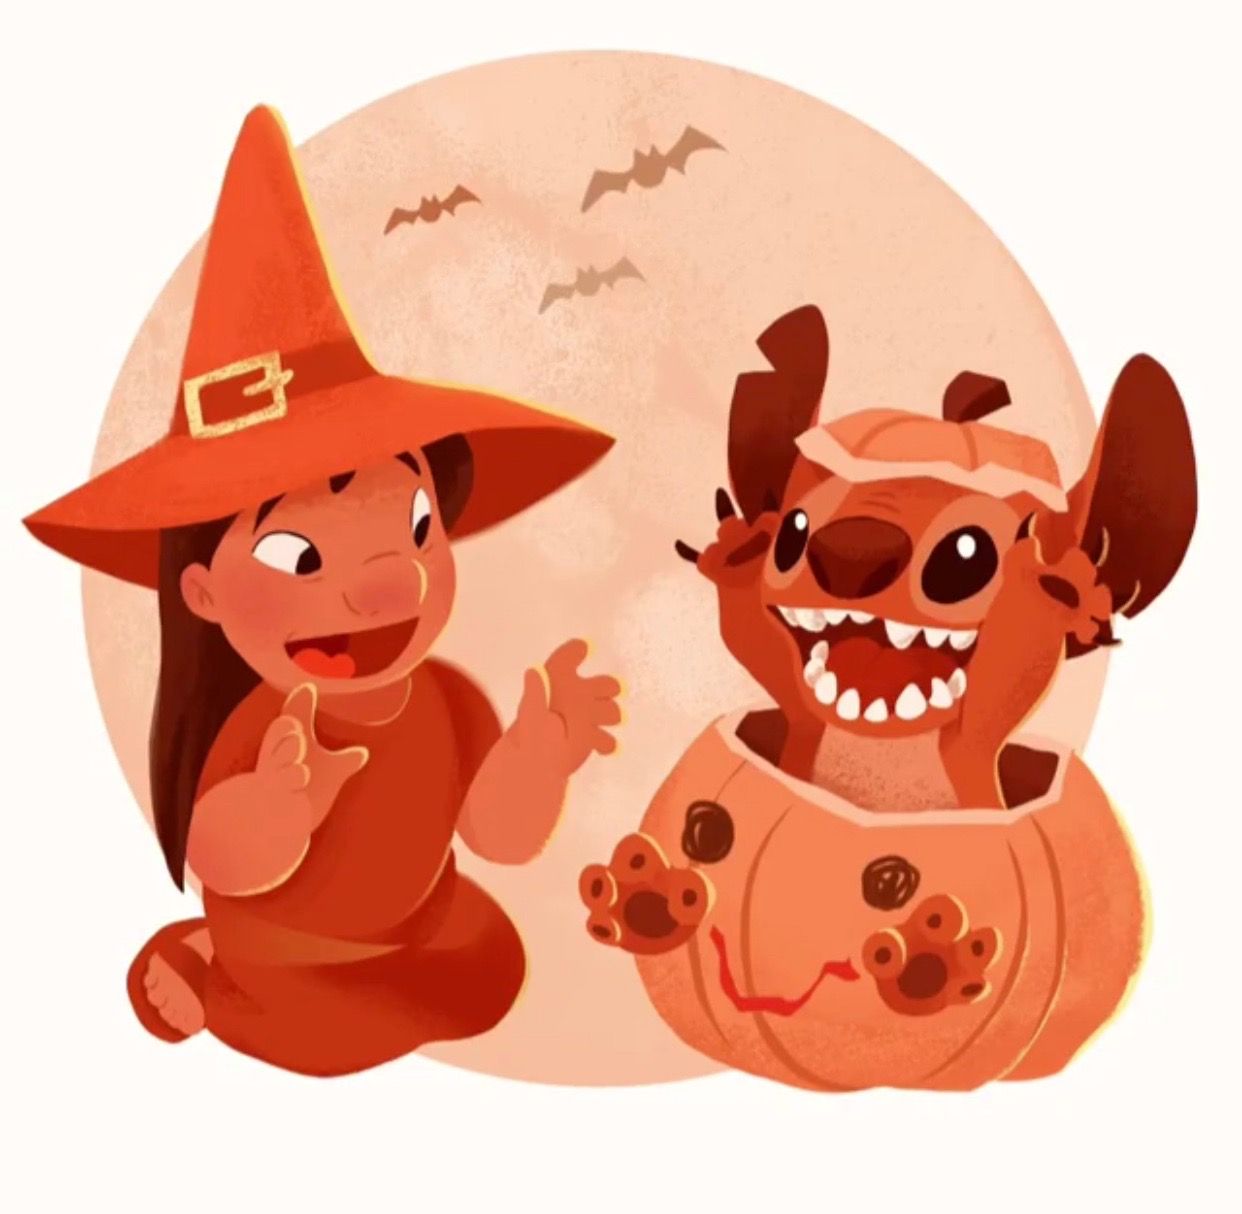 Best Friends  Matching HalloweenFall backgrounds for you and